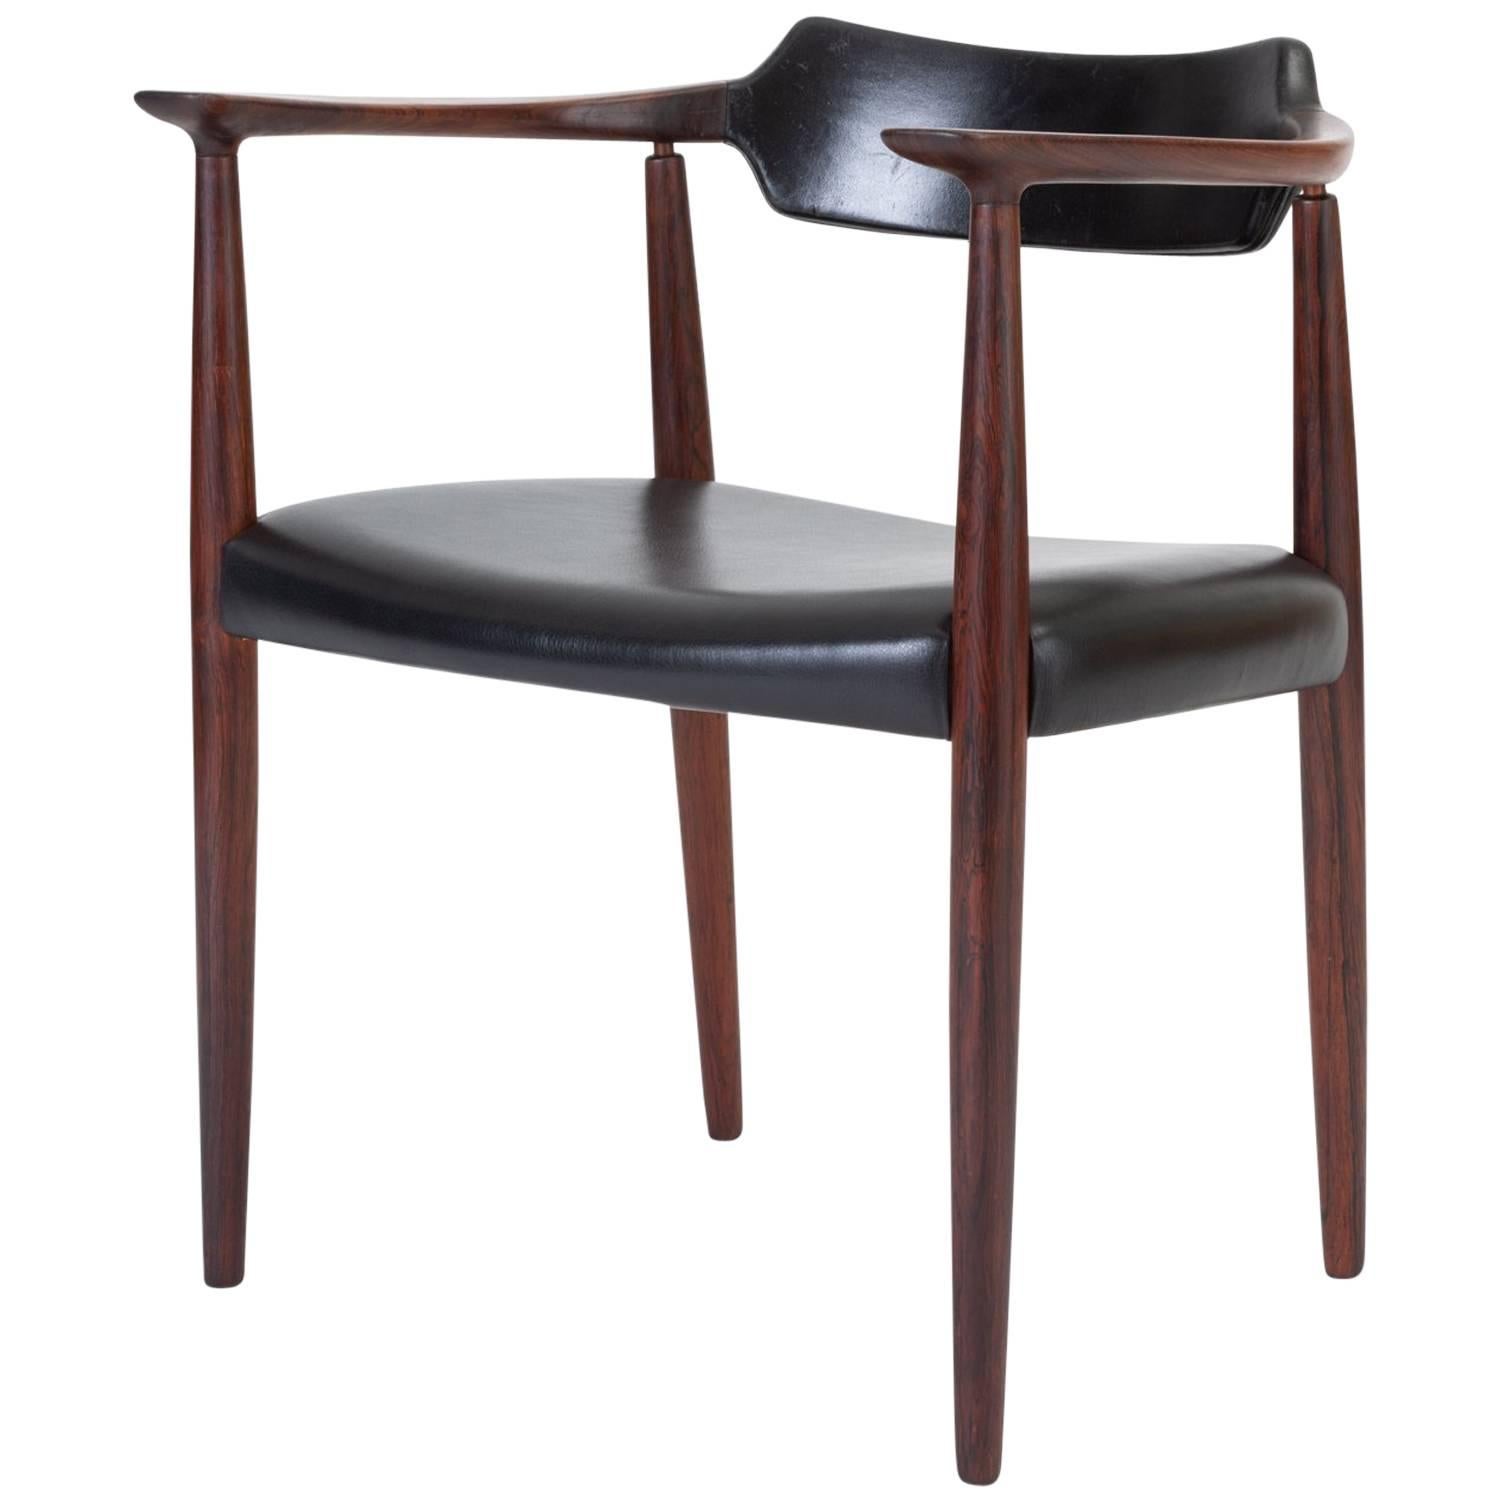 Rosewood and Leather Armchair by Bent Andersen for Christensen & Larsen